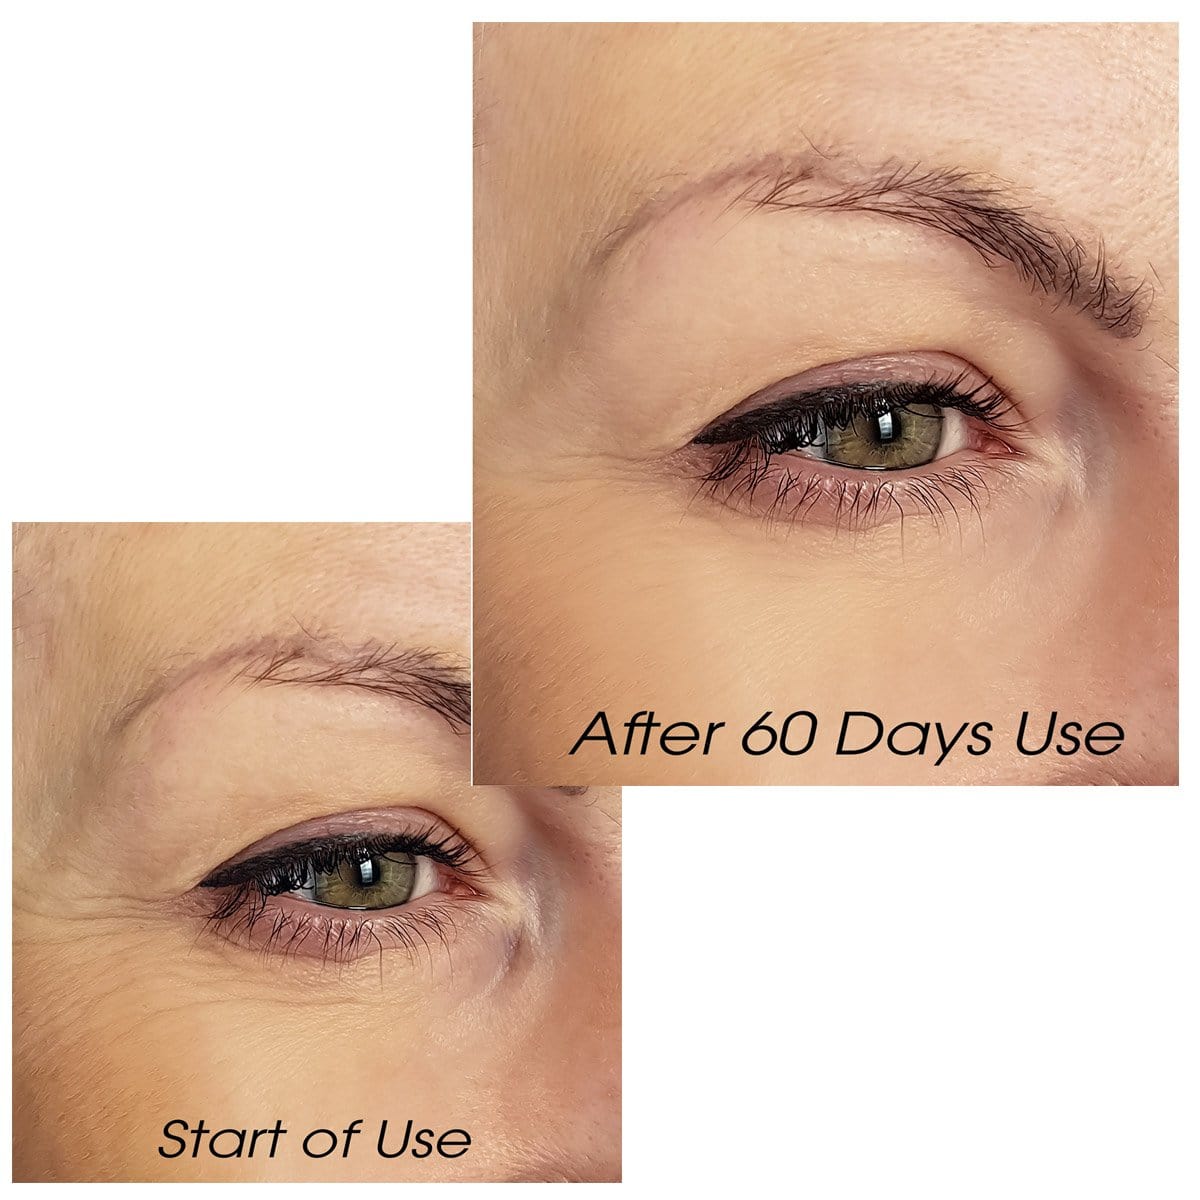 The Two Products The Eye & Lip System - Everything You Need in Two Products - Save 20%